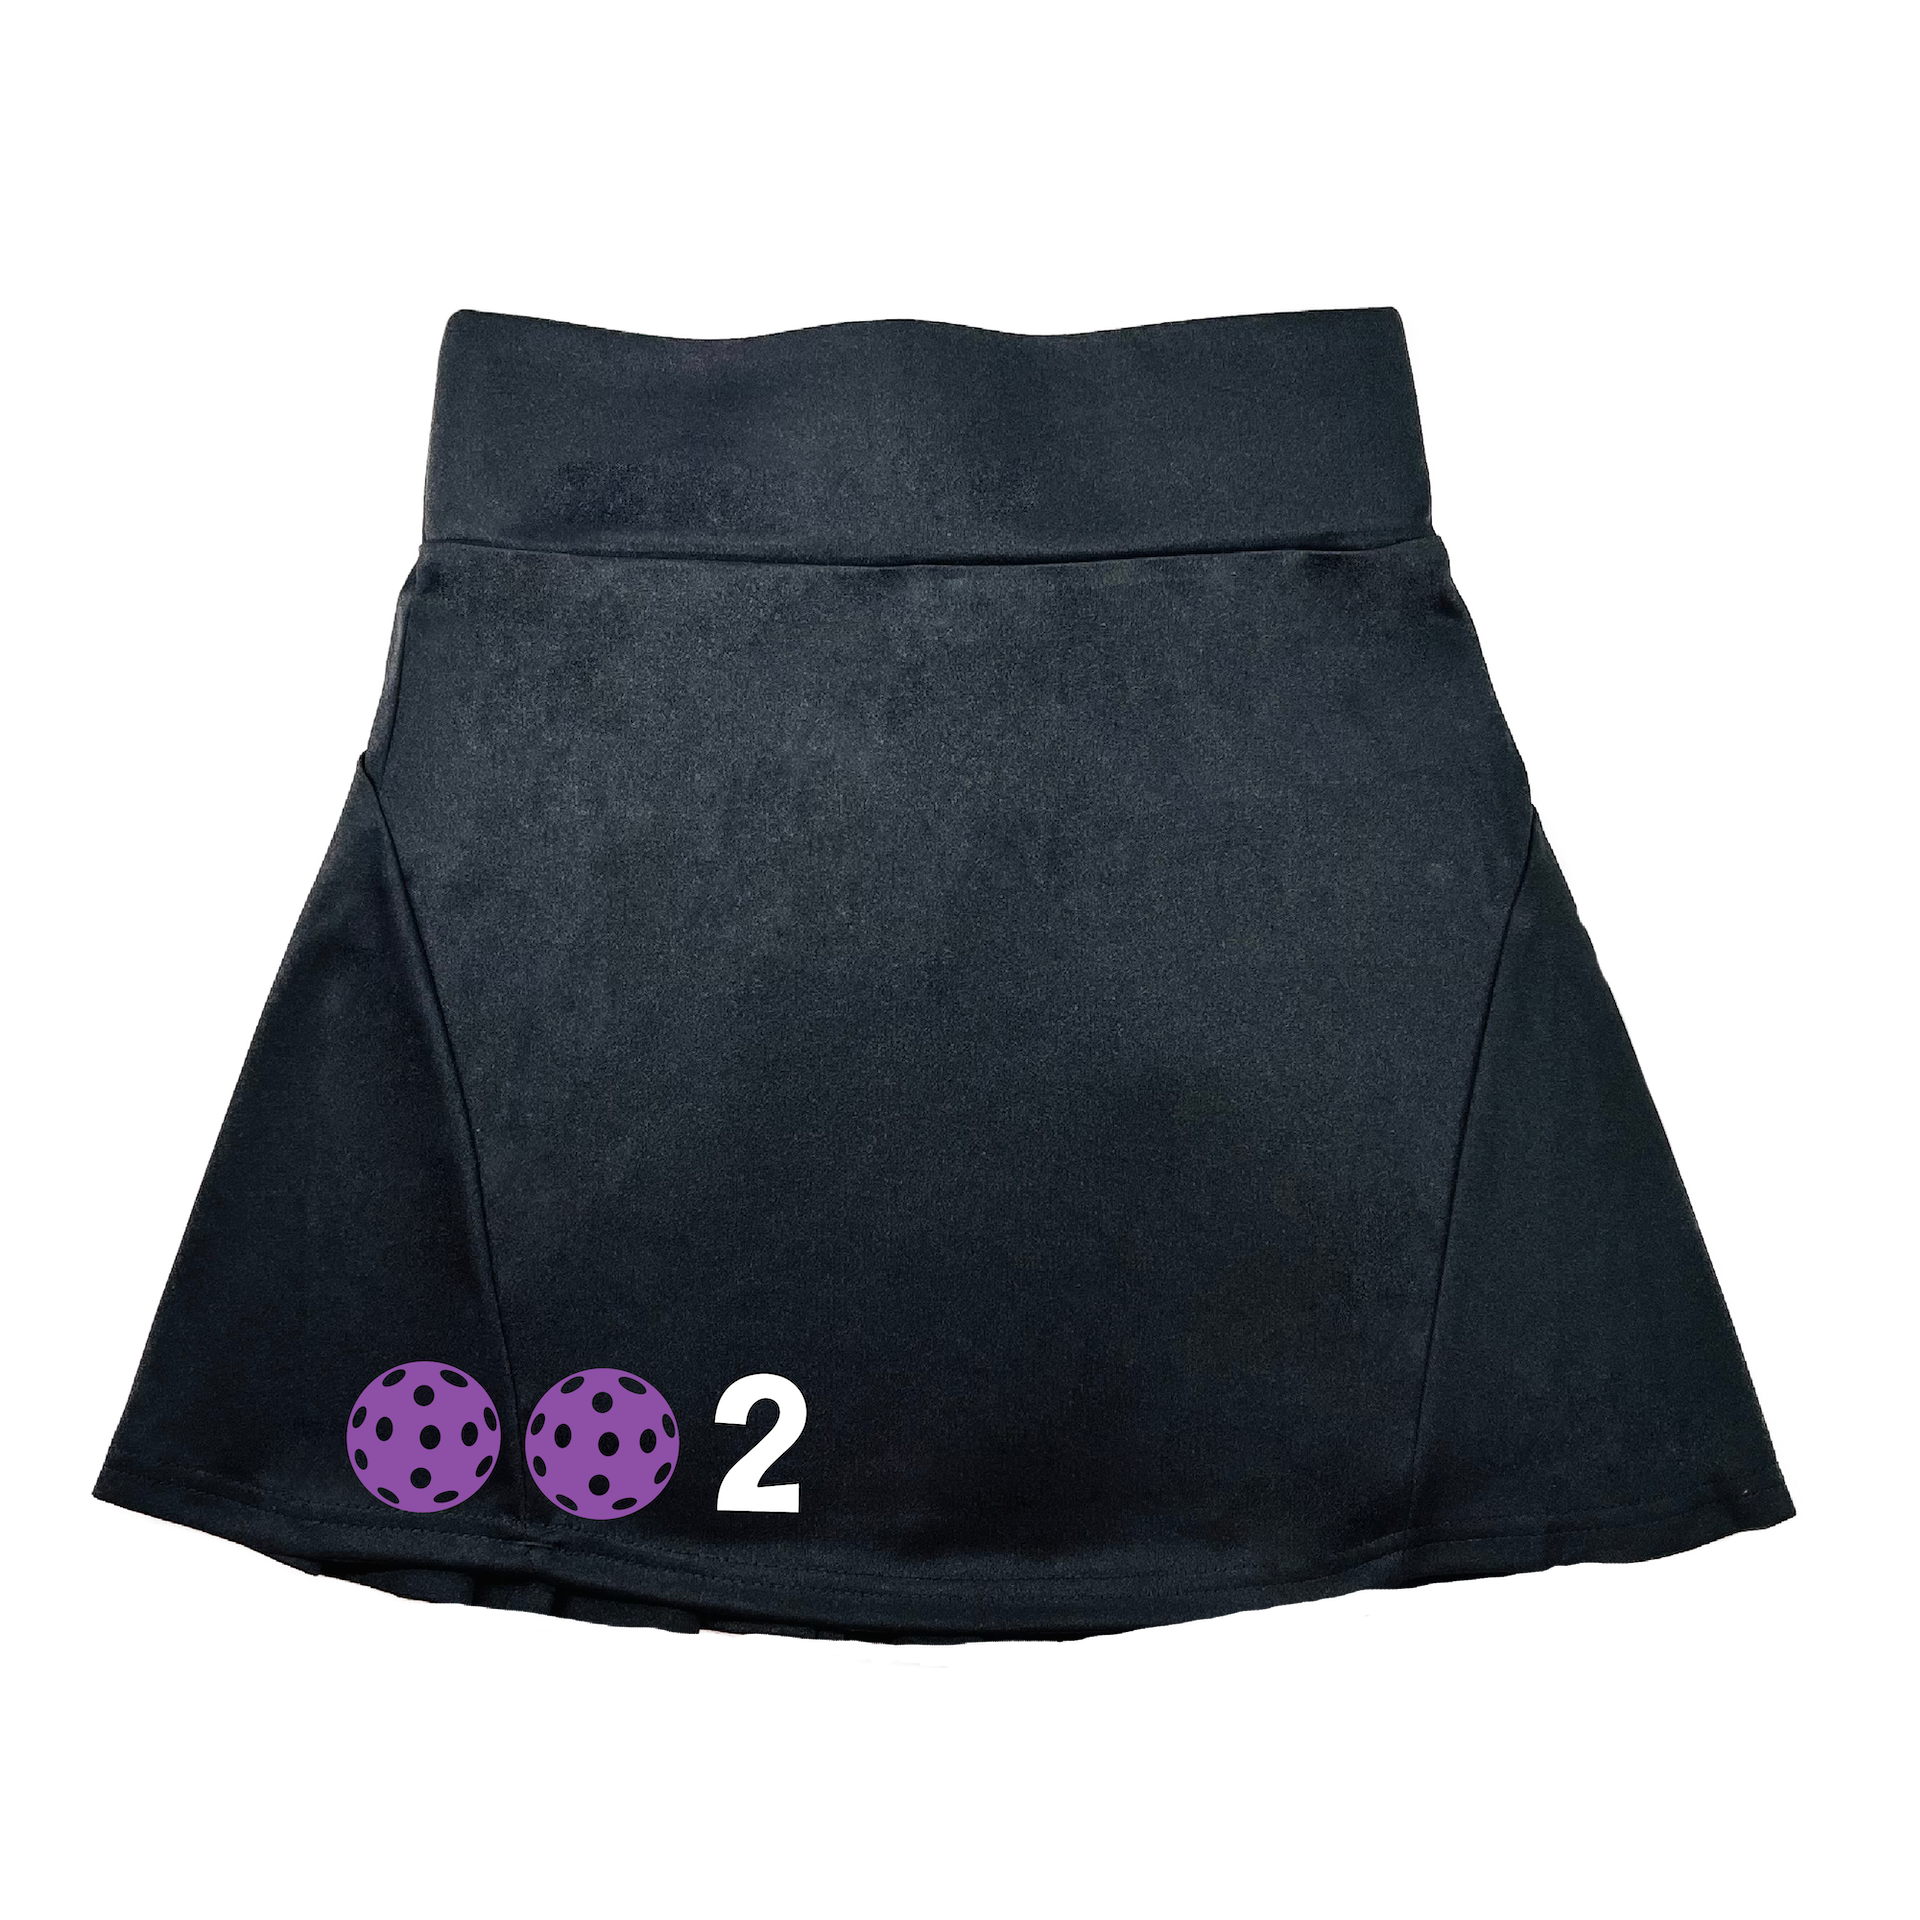 Pickleball 002 Customizable Ball color:  Choose: Cyan , Purple or Rainbow.  Pickleball Flirty These flirty skorts have a flat mid-rise waistband with a 3-inch waistband.  Light weight without being see through and the material wicks away moisture quickly.  Flirty pleats in the back with inner shorts for free movement and stylish coverage on the courts.  A functional zipper pocket on the back and two built in pockets on the shorts for convenient storage. The rear pleats are what make these skorts fabulous!  